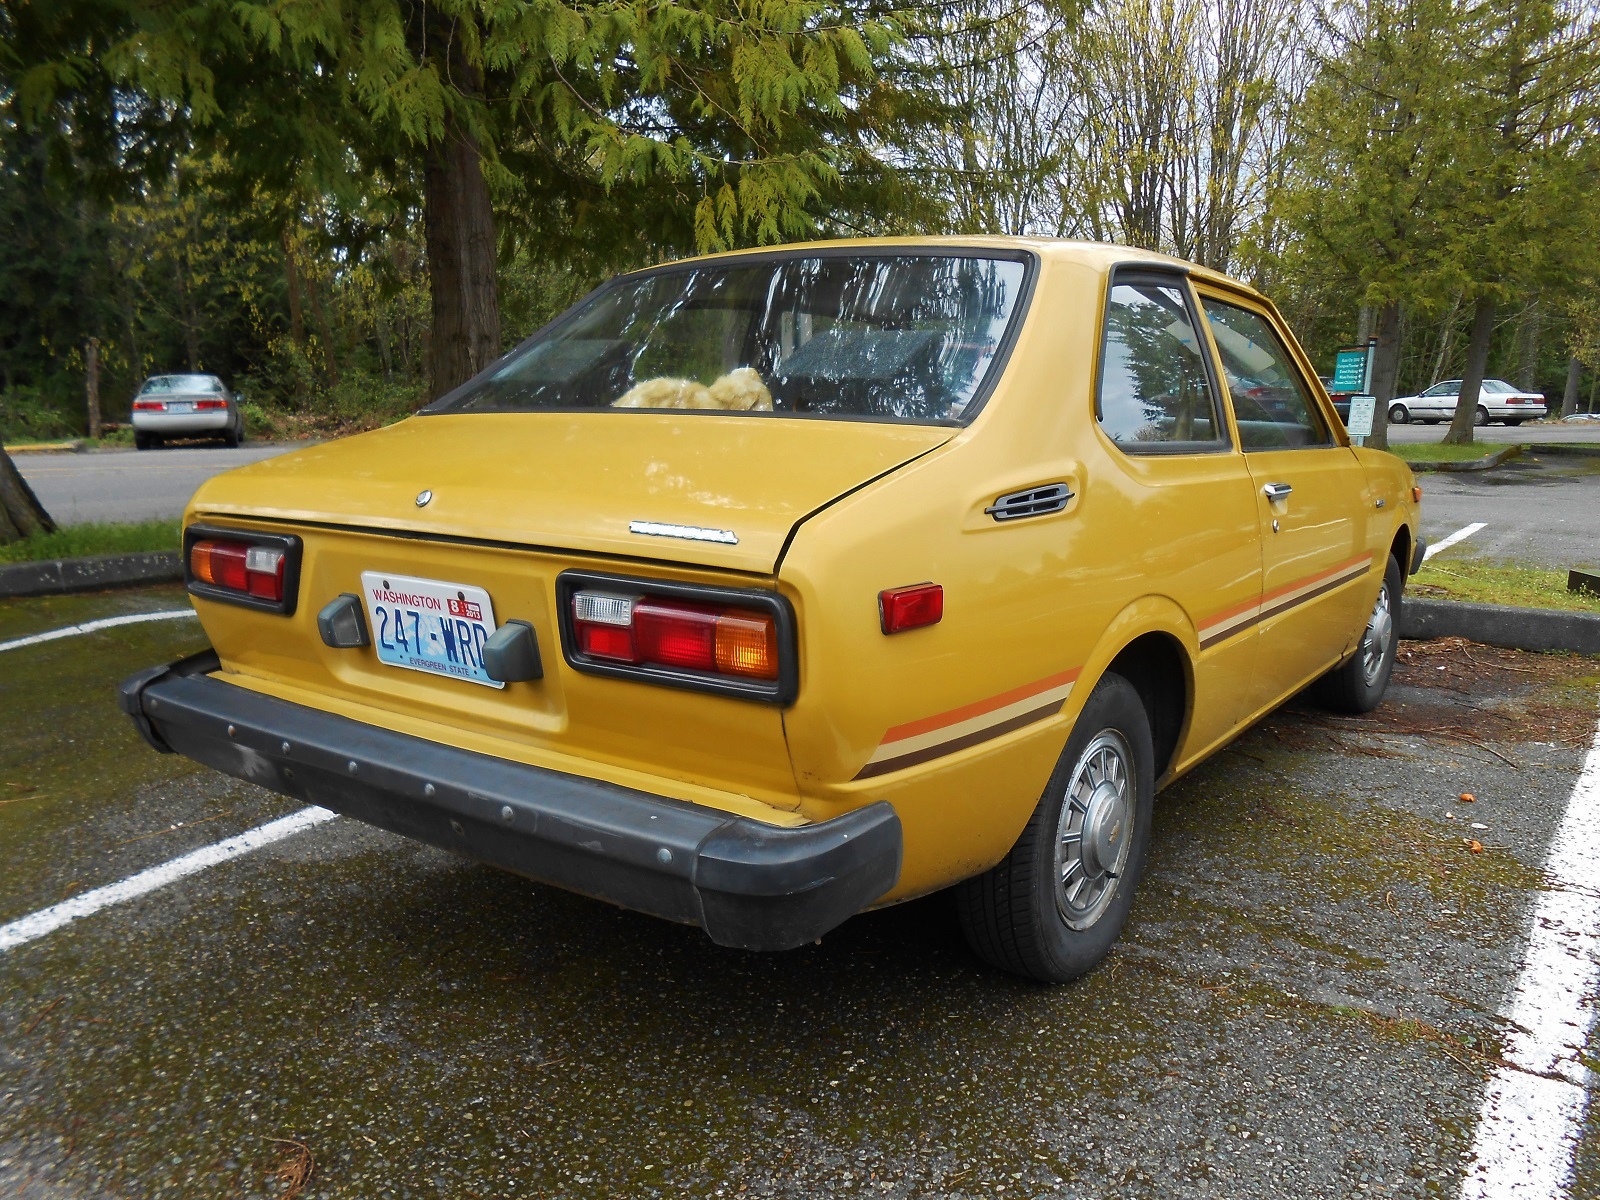 Seattle's Parked Cars: 1976 Toyota Corolla